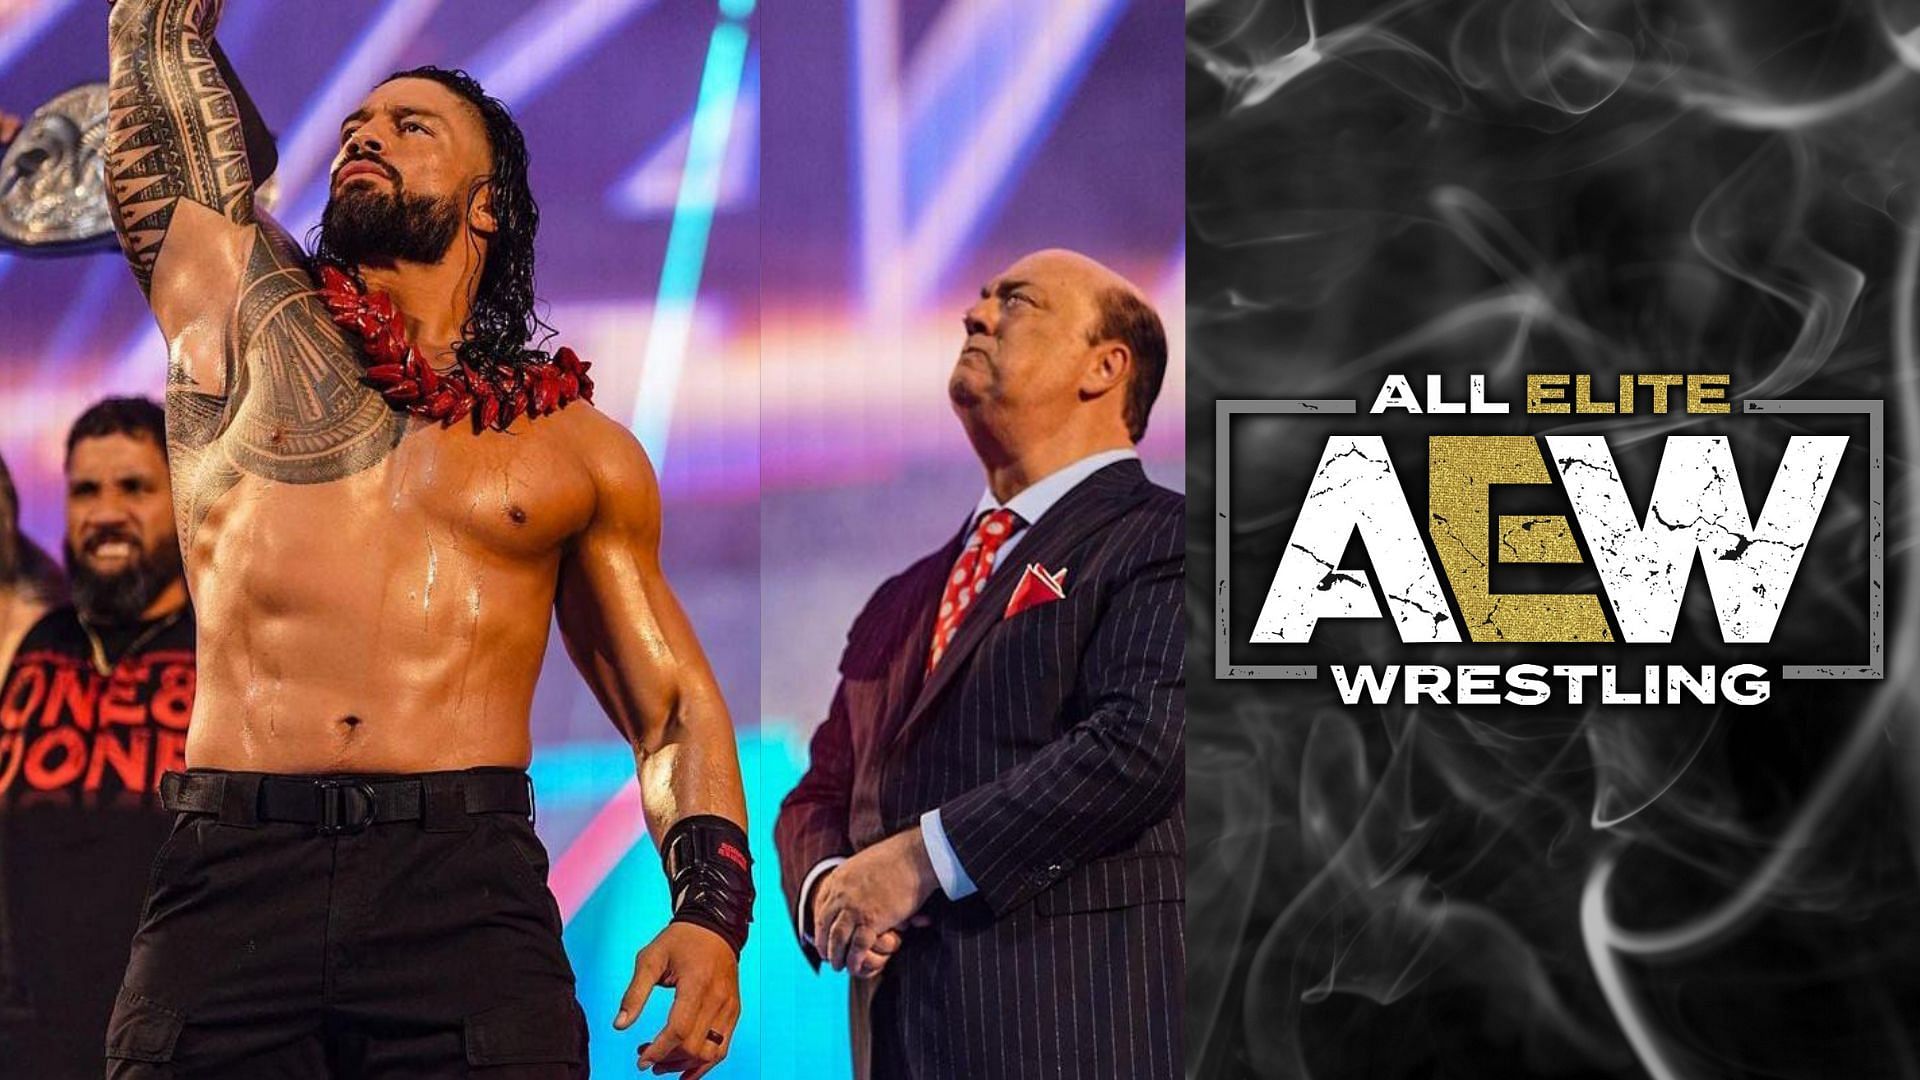 Which Bloodline member once dropped a major hint of joining AEW?